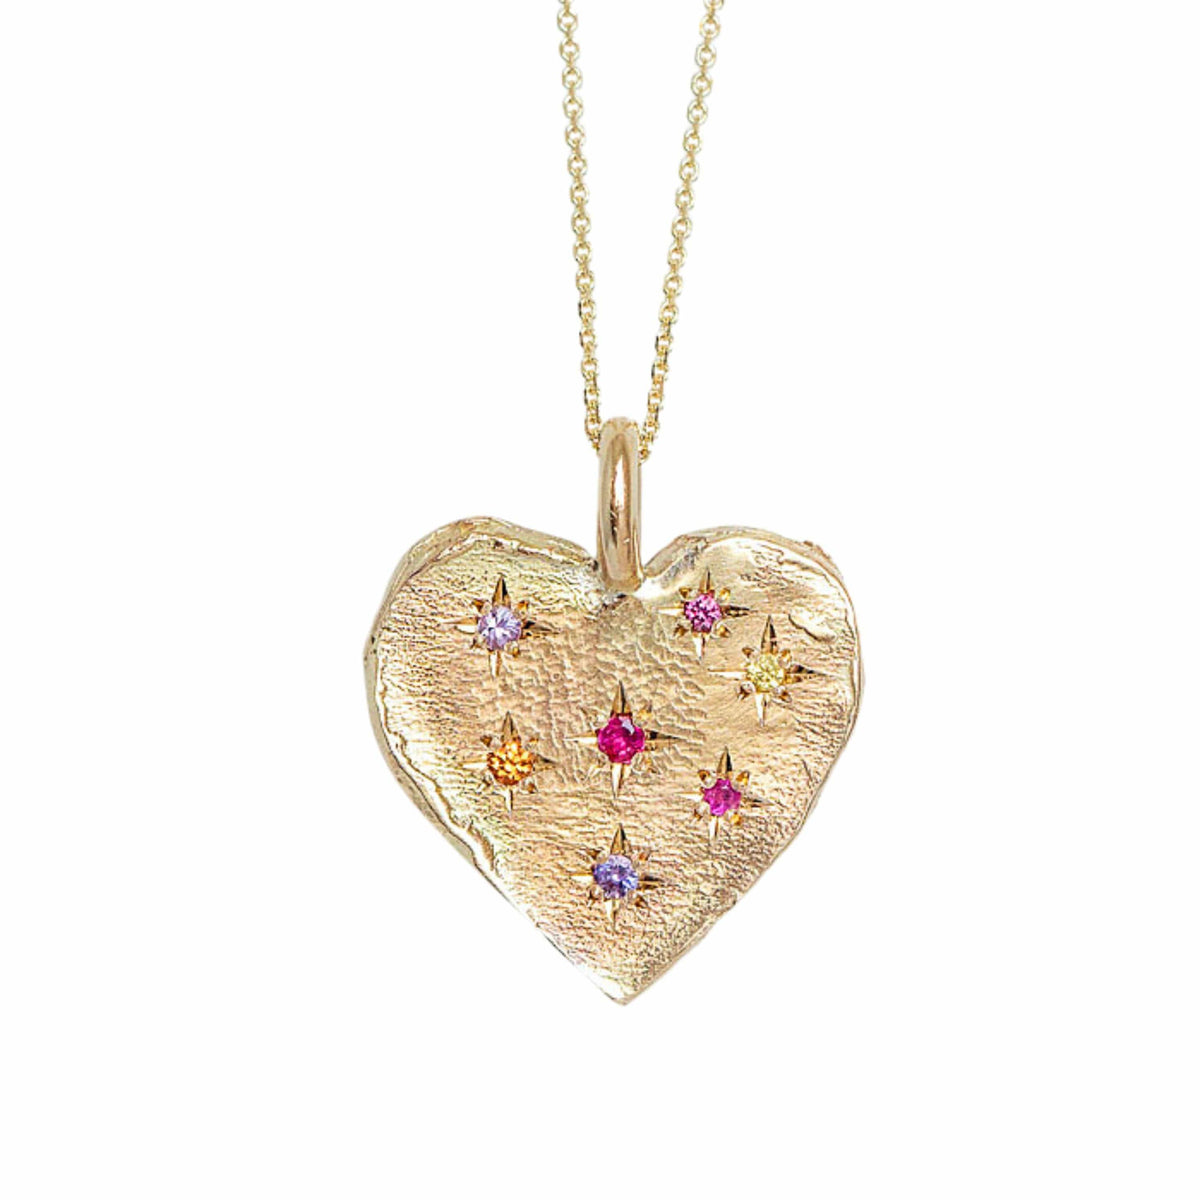 Shades of Pink Sapphires Big Heart Necklace